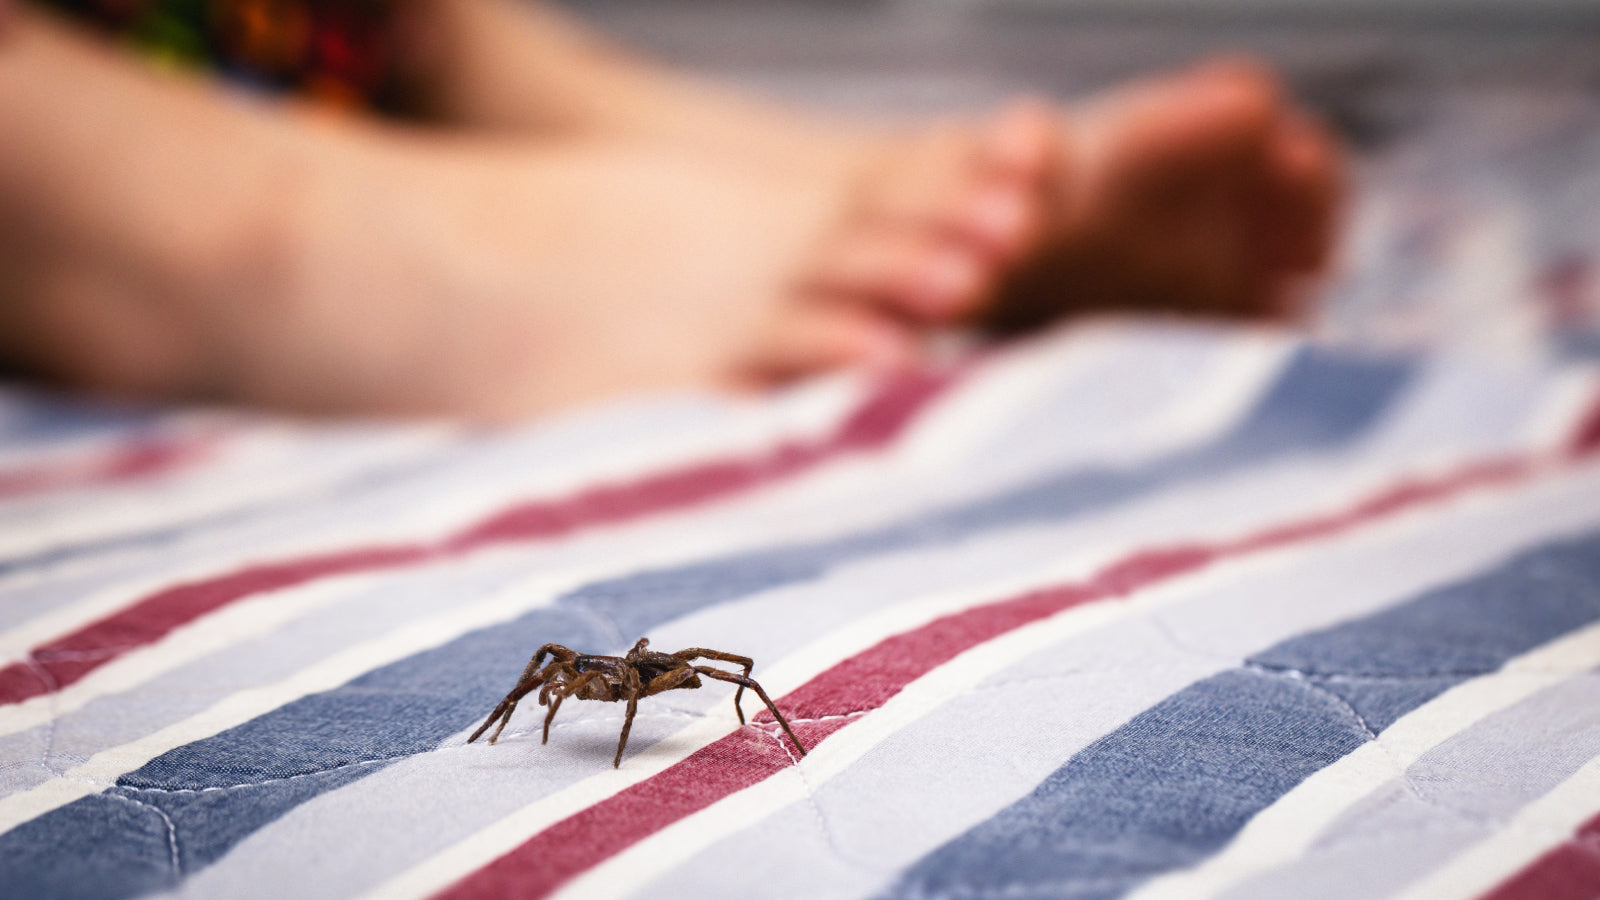 A spider crawls on the bed next to the feet of a person laying on top of a red white and blue striped comforter